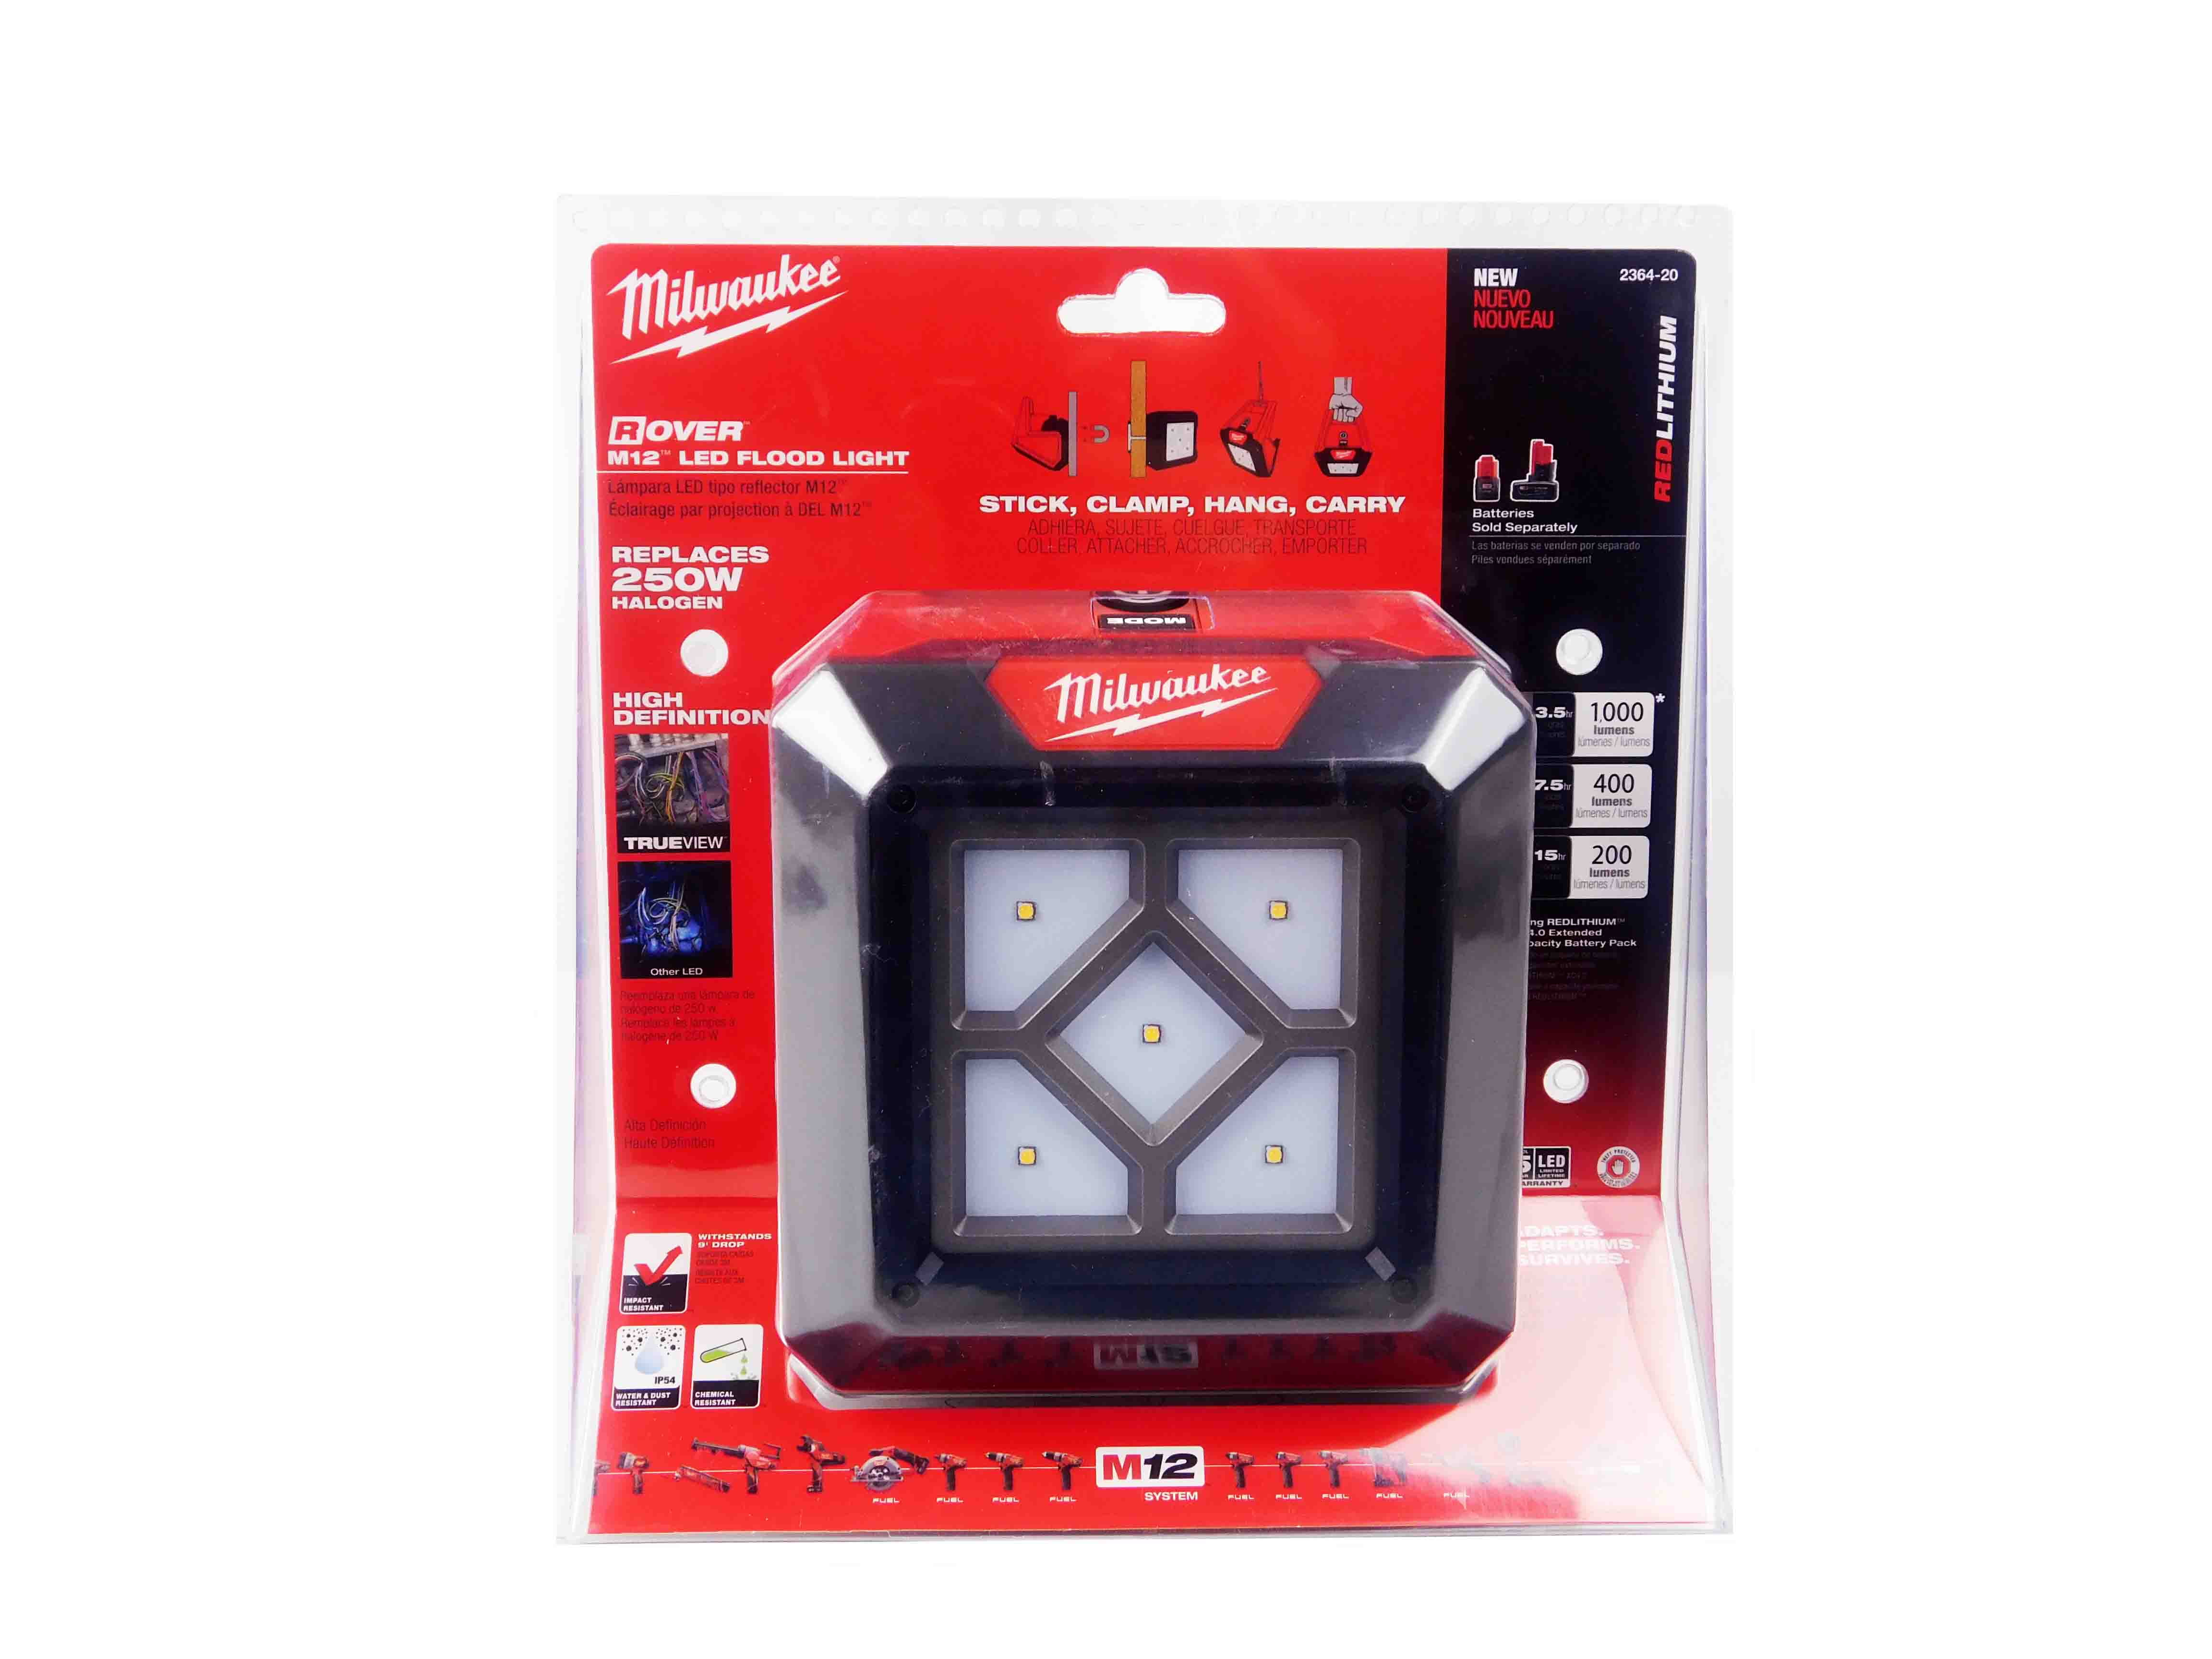 Milwaukee M12 Cordless Compact Flood Light 1000 Lumen Rover LED 12v LithiumIon for sale online 